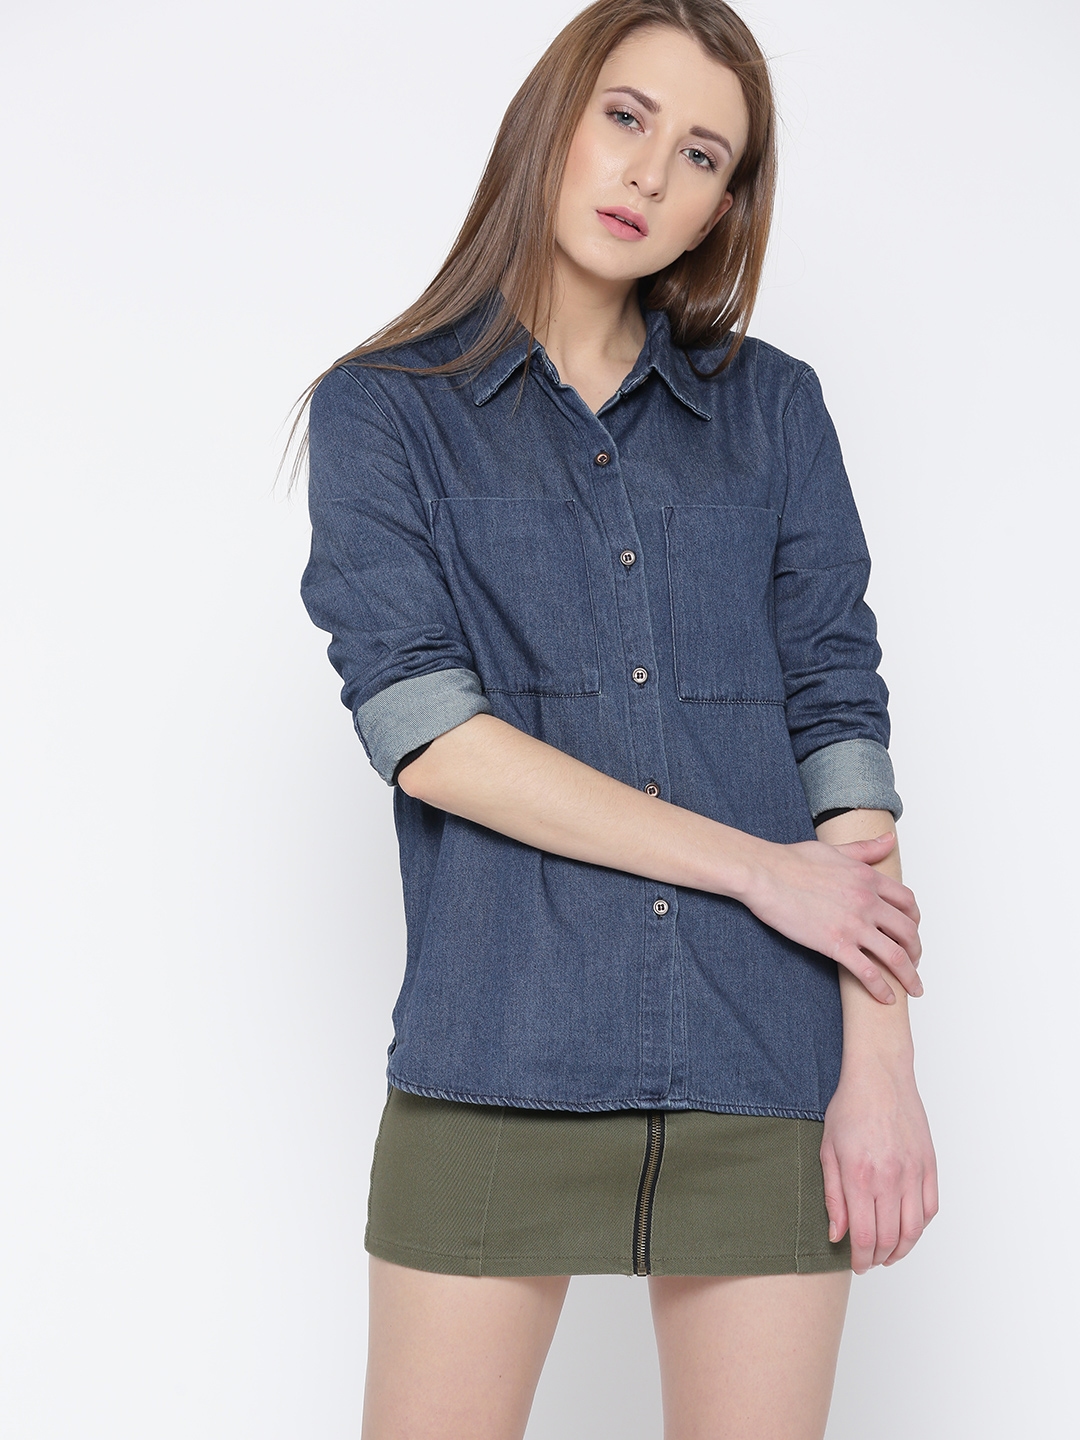 Shop Denim Shirt Dress for Women from latest collection at Forever 21   369759